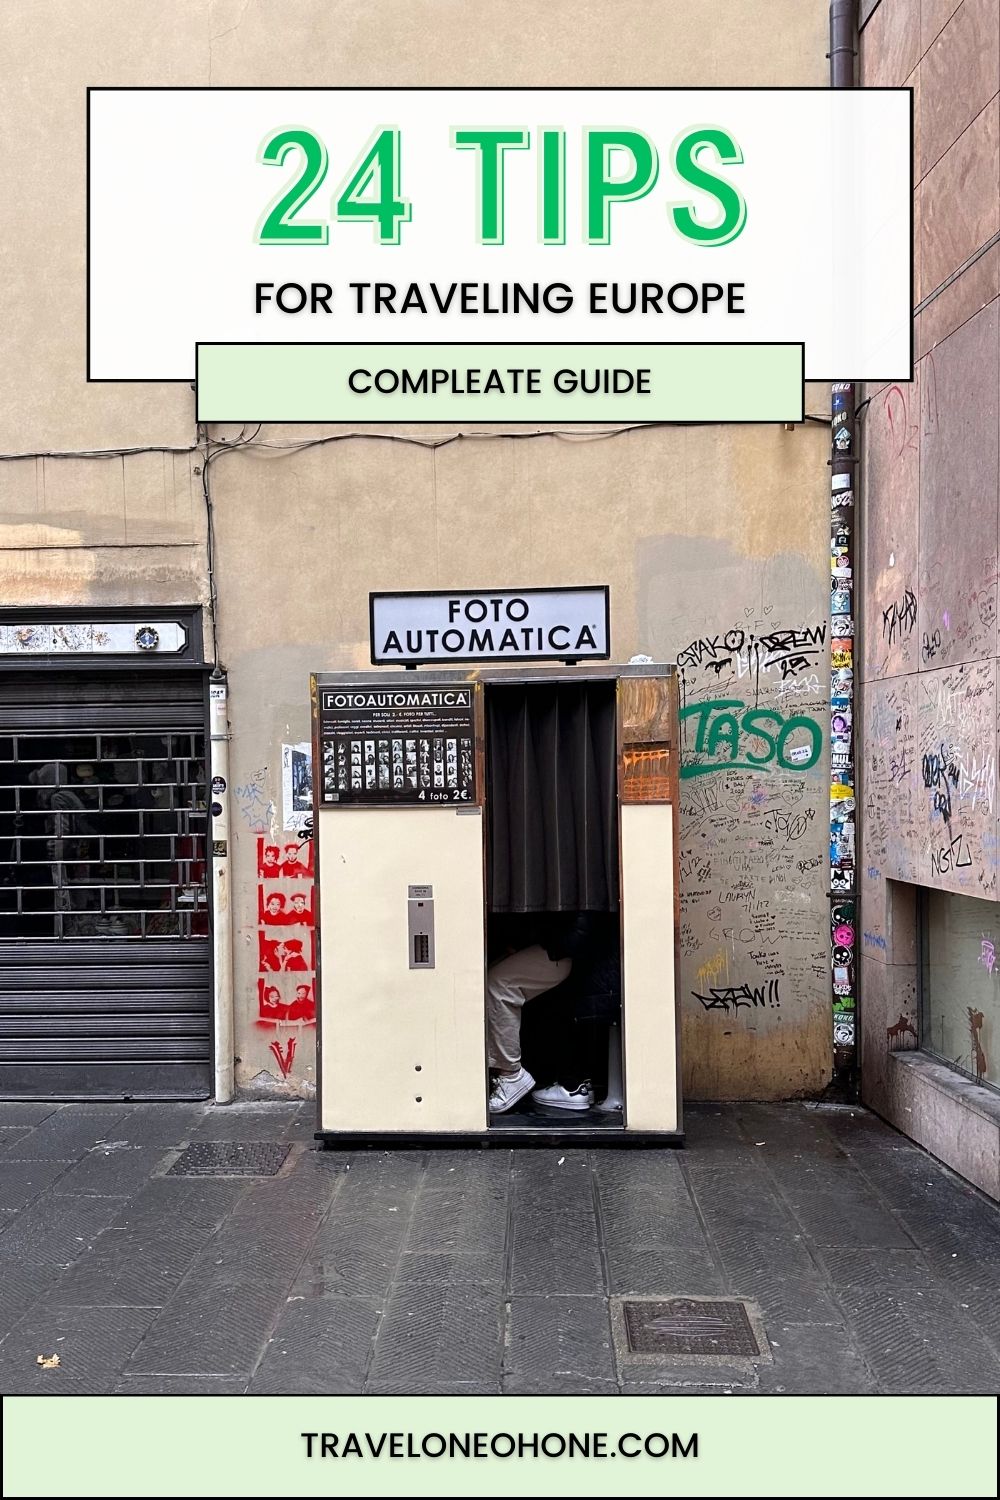 24 Tips for Traveling Europe